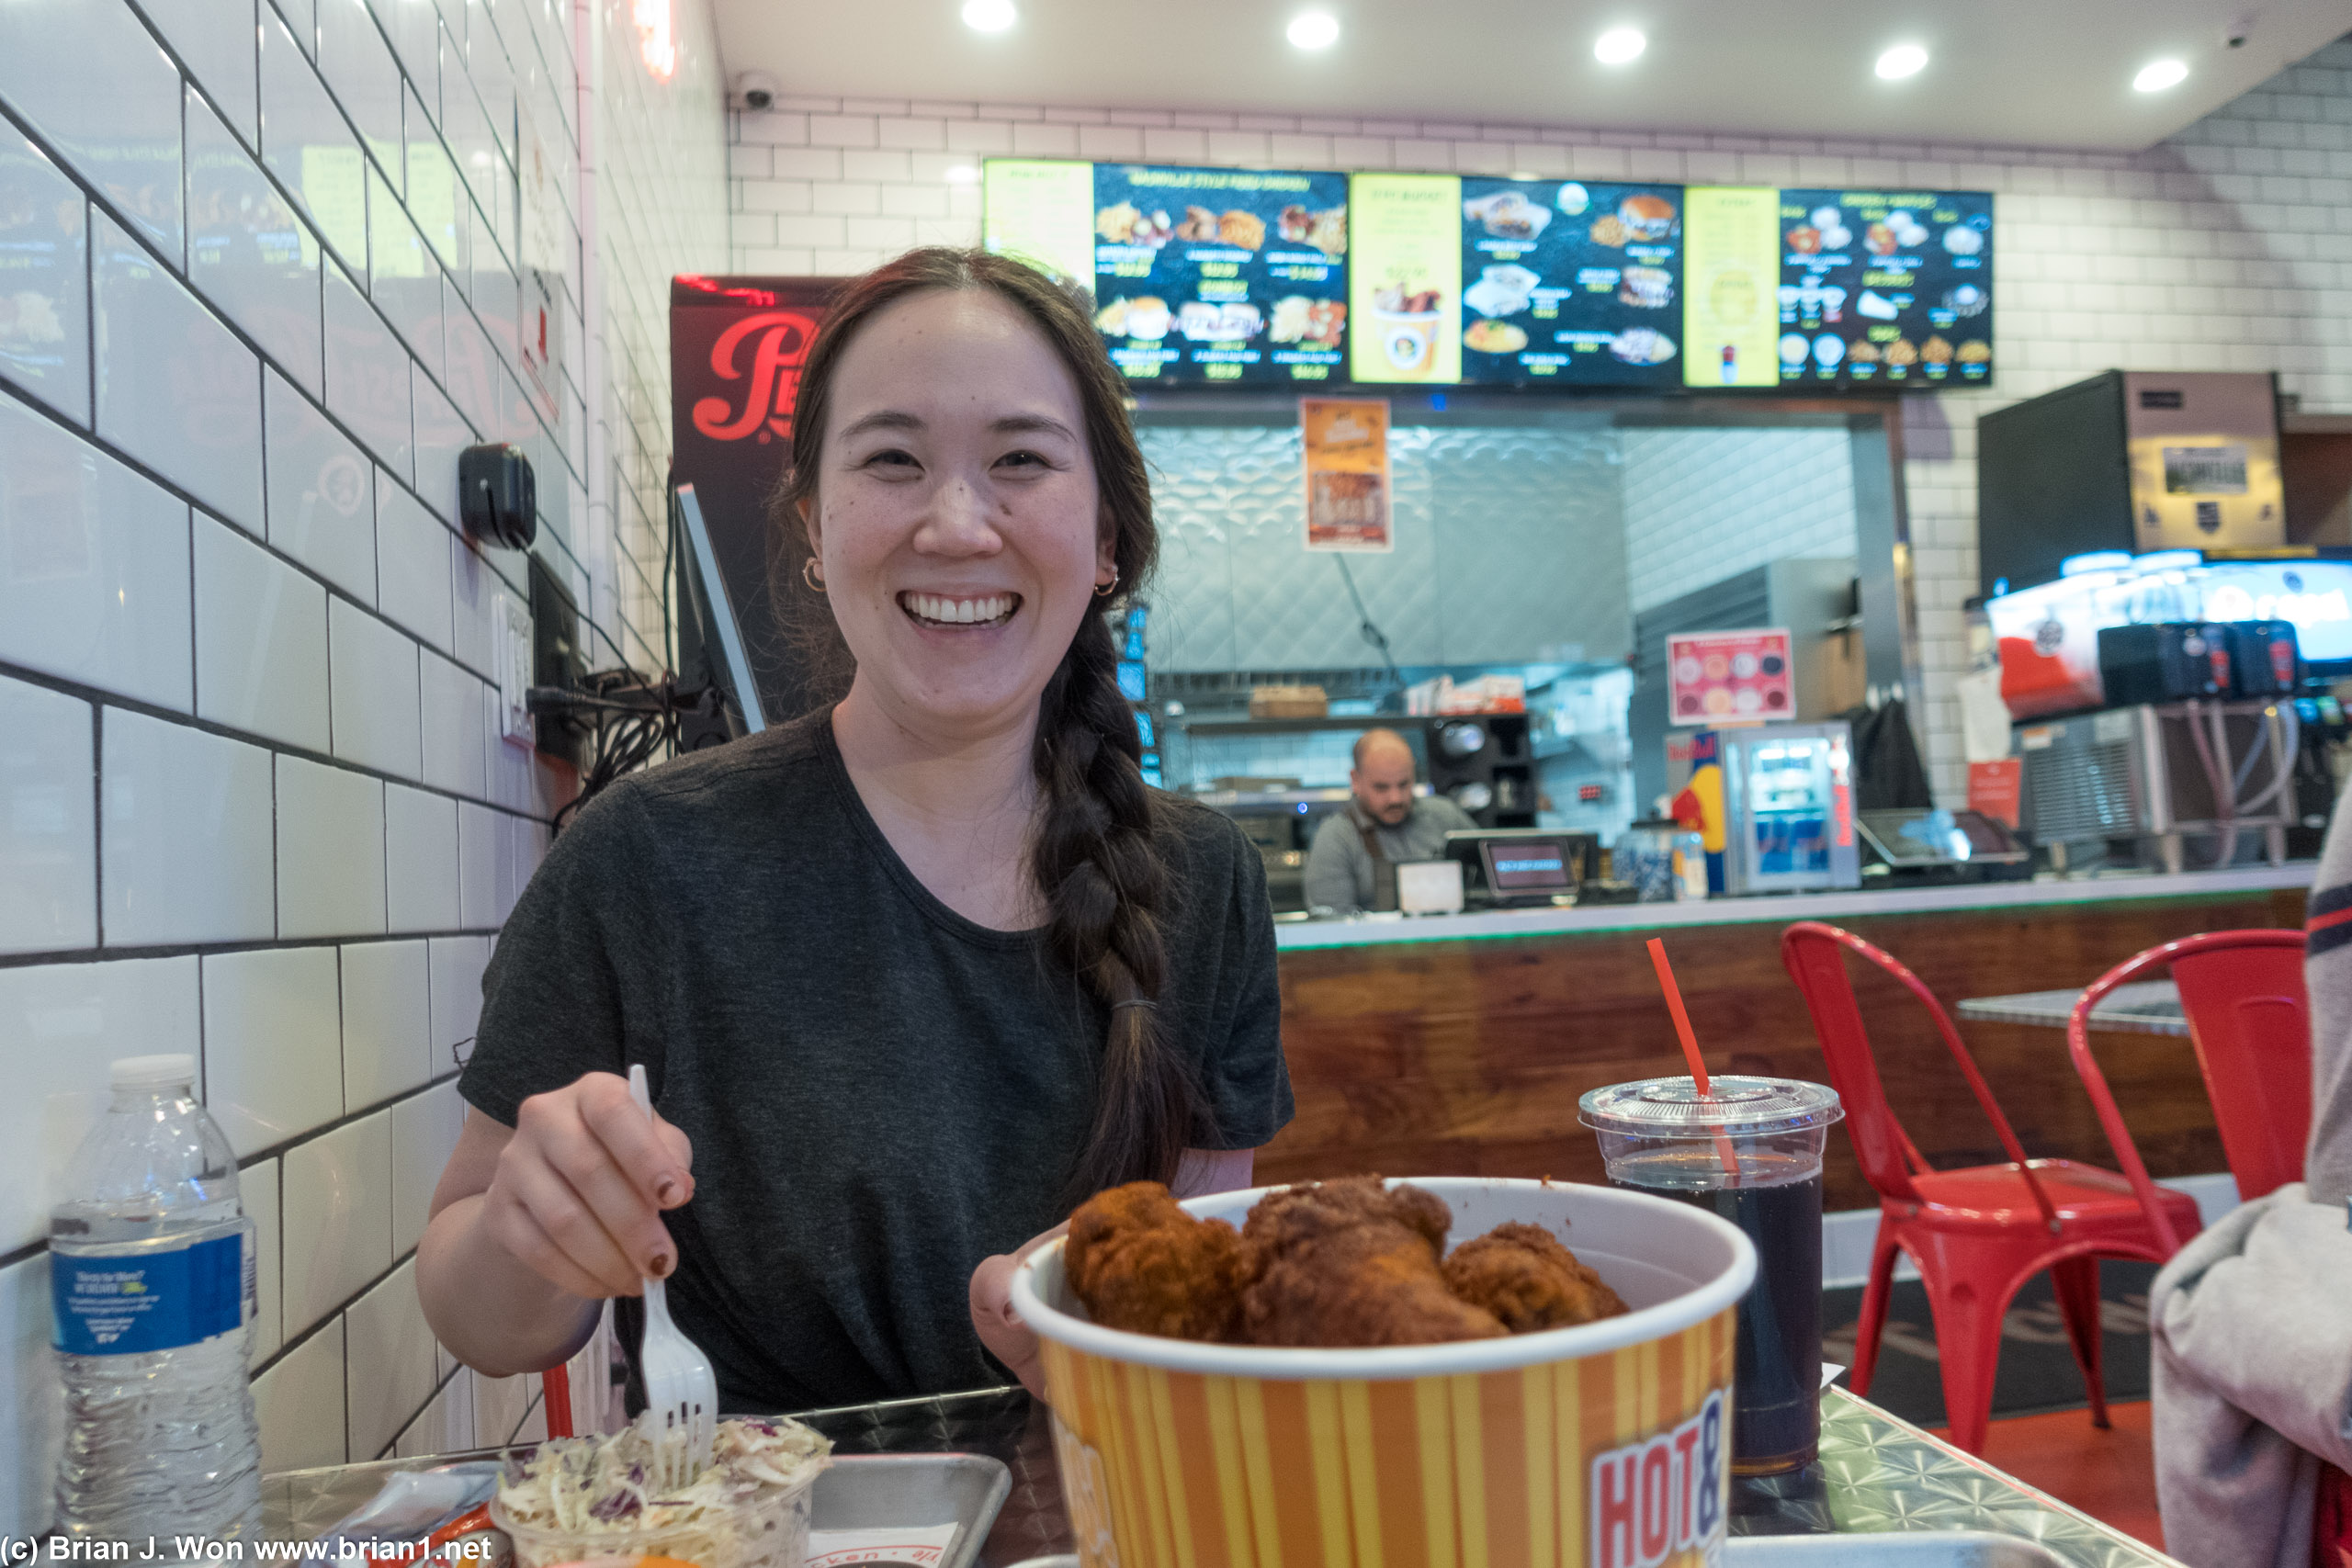 Dr. Wang looks very happy to be getting fried chicken.